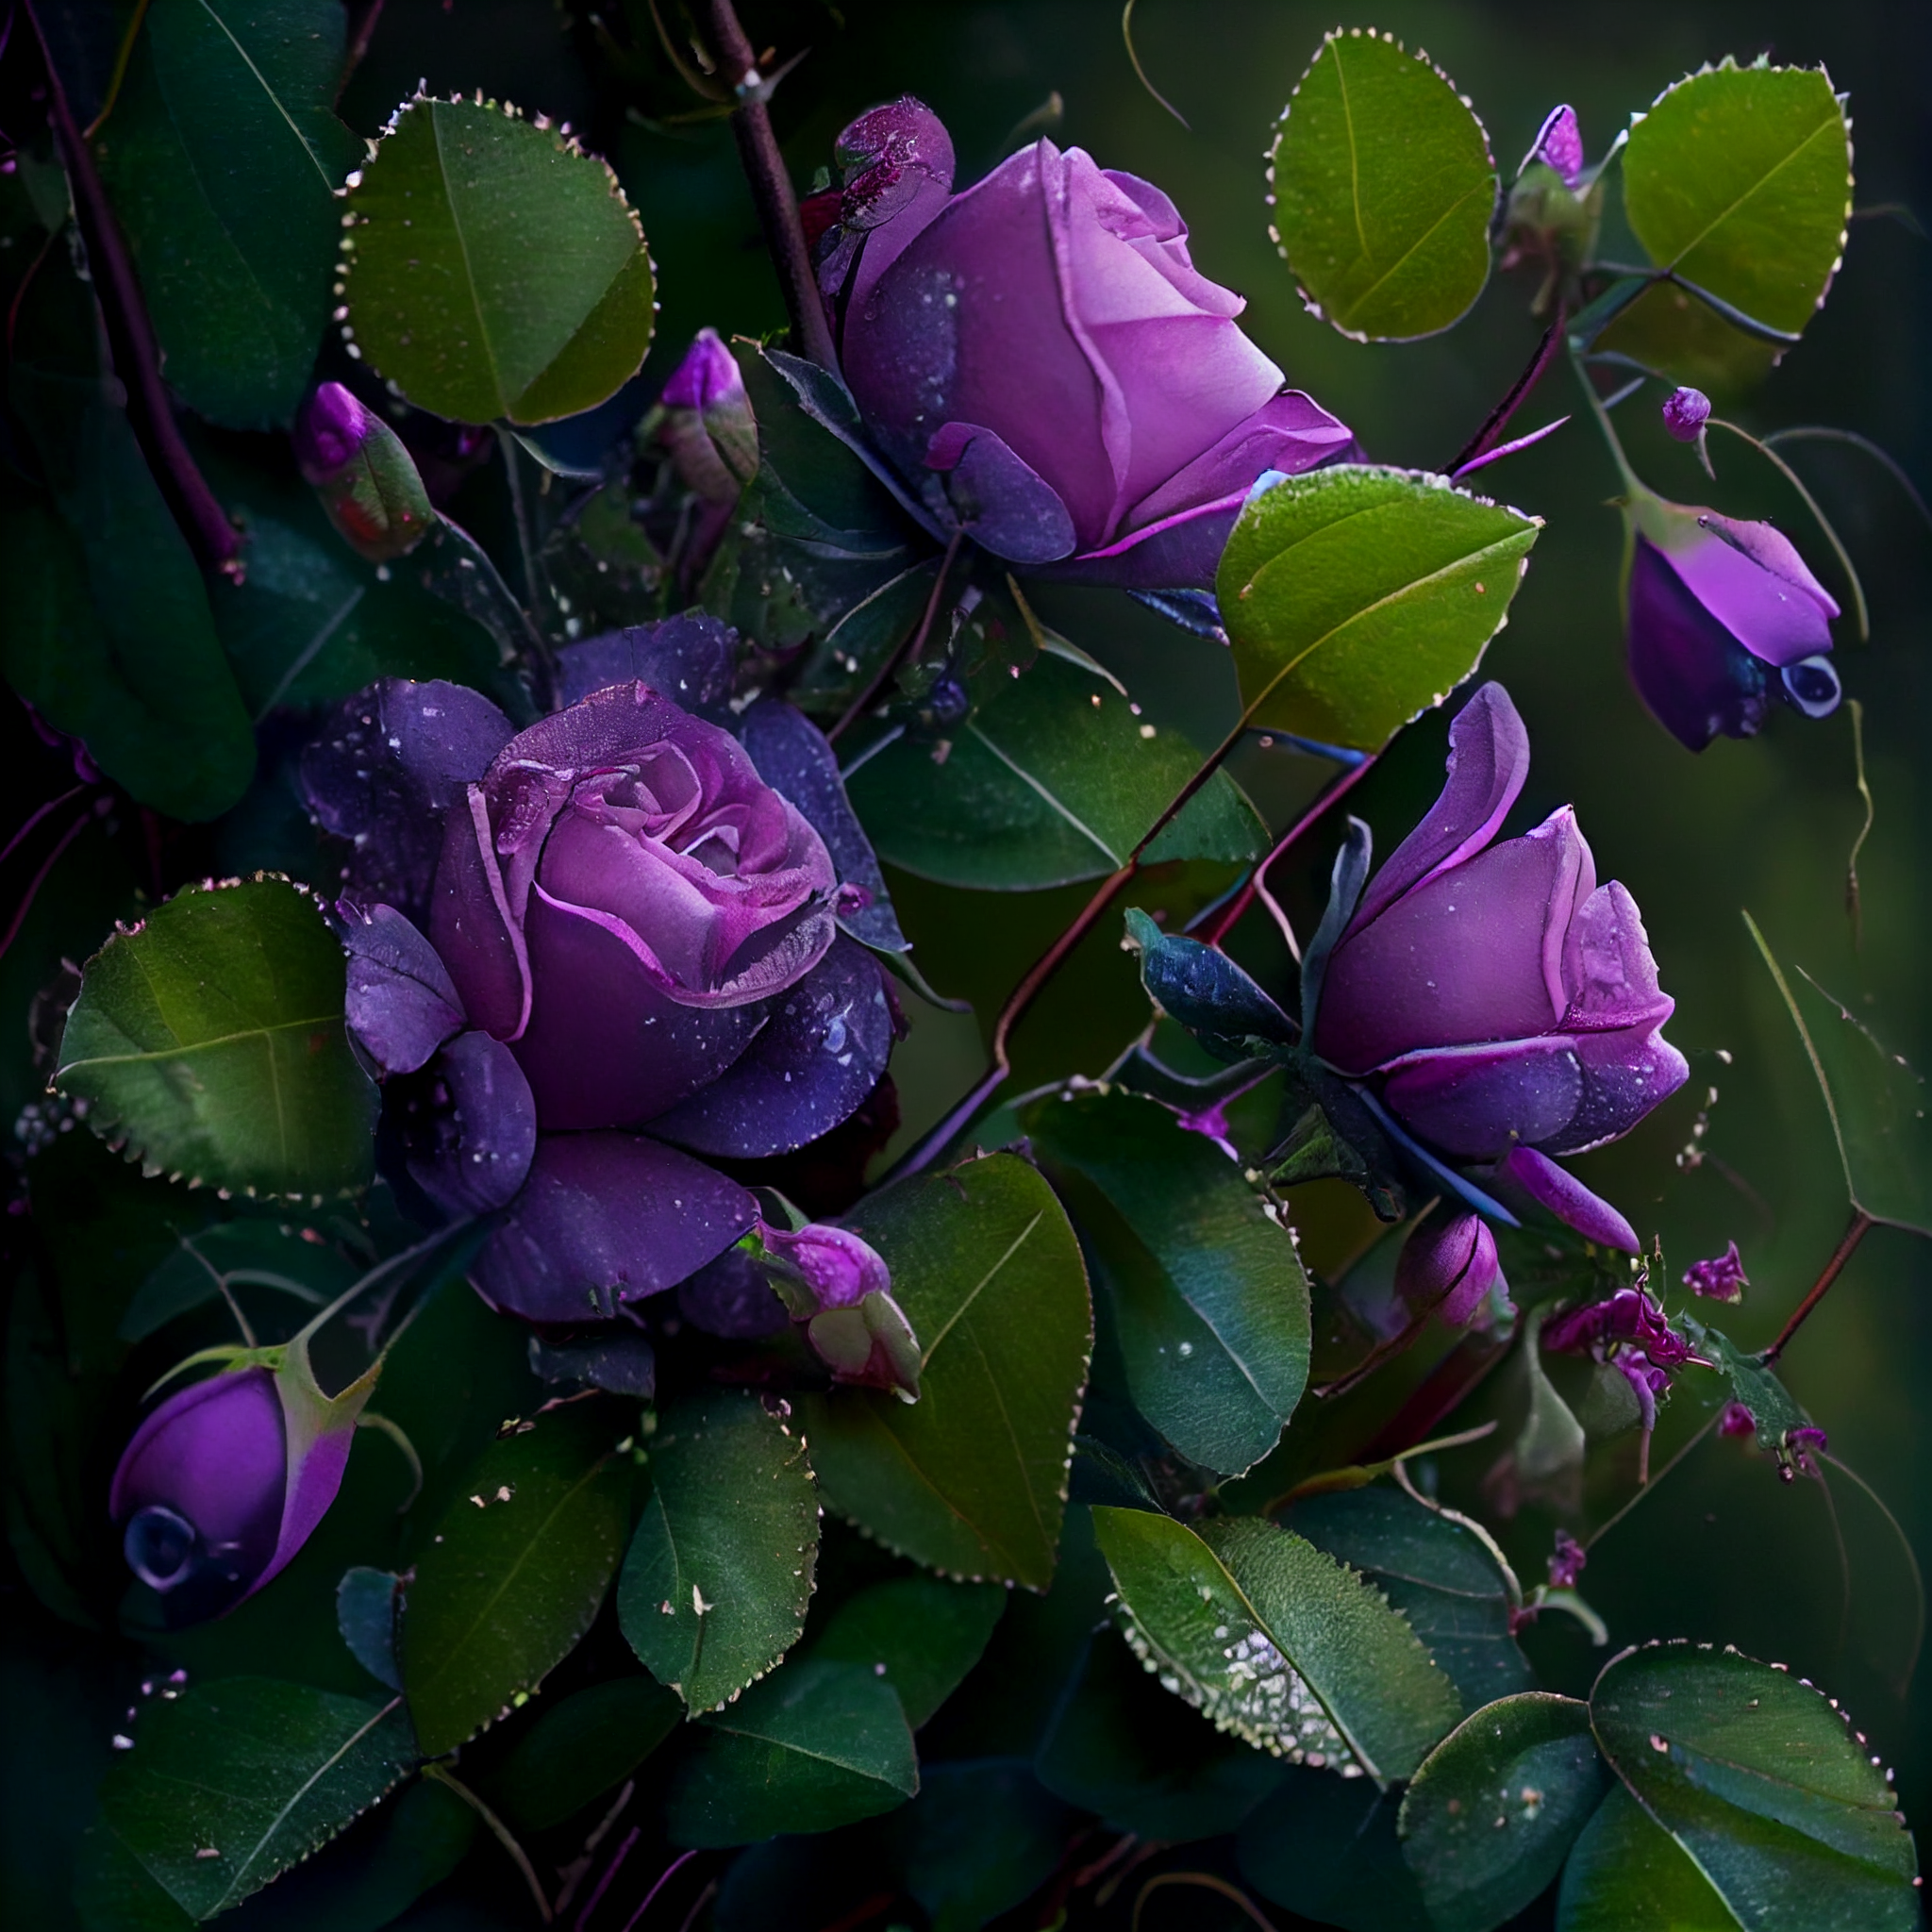 Radiant Beauty: The Dewy Violet Rose amidst a Thorny Bush